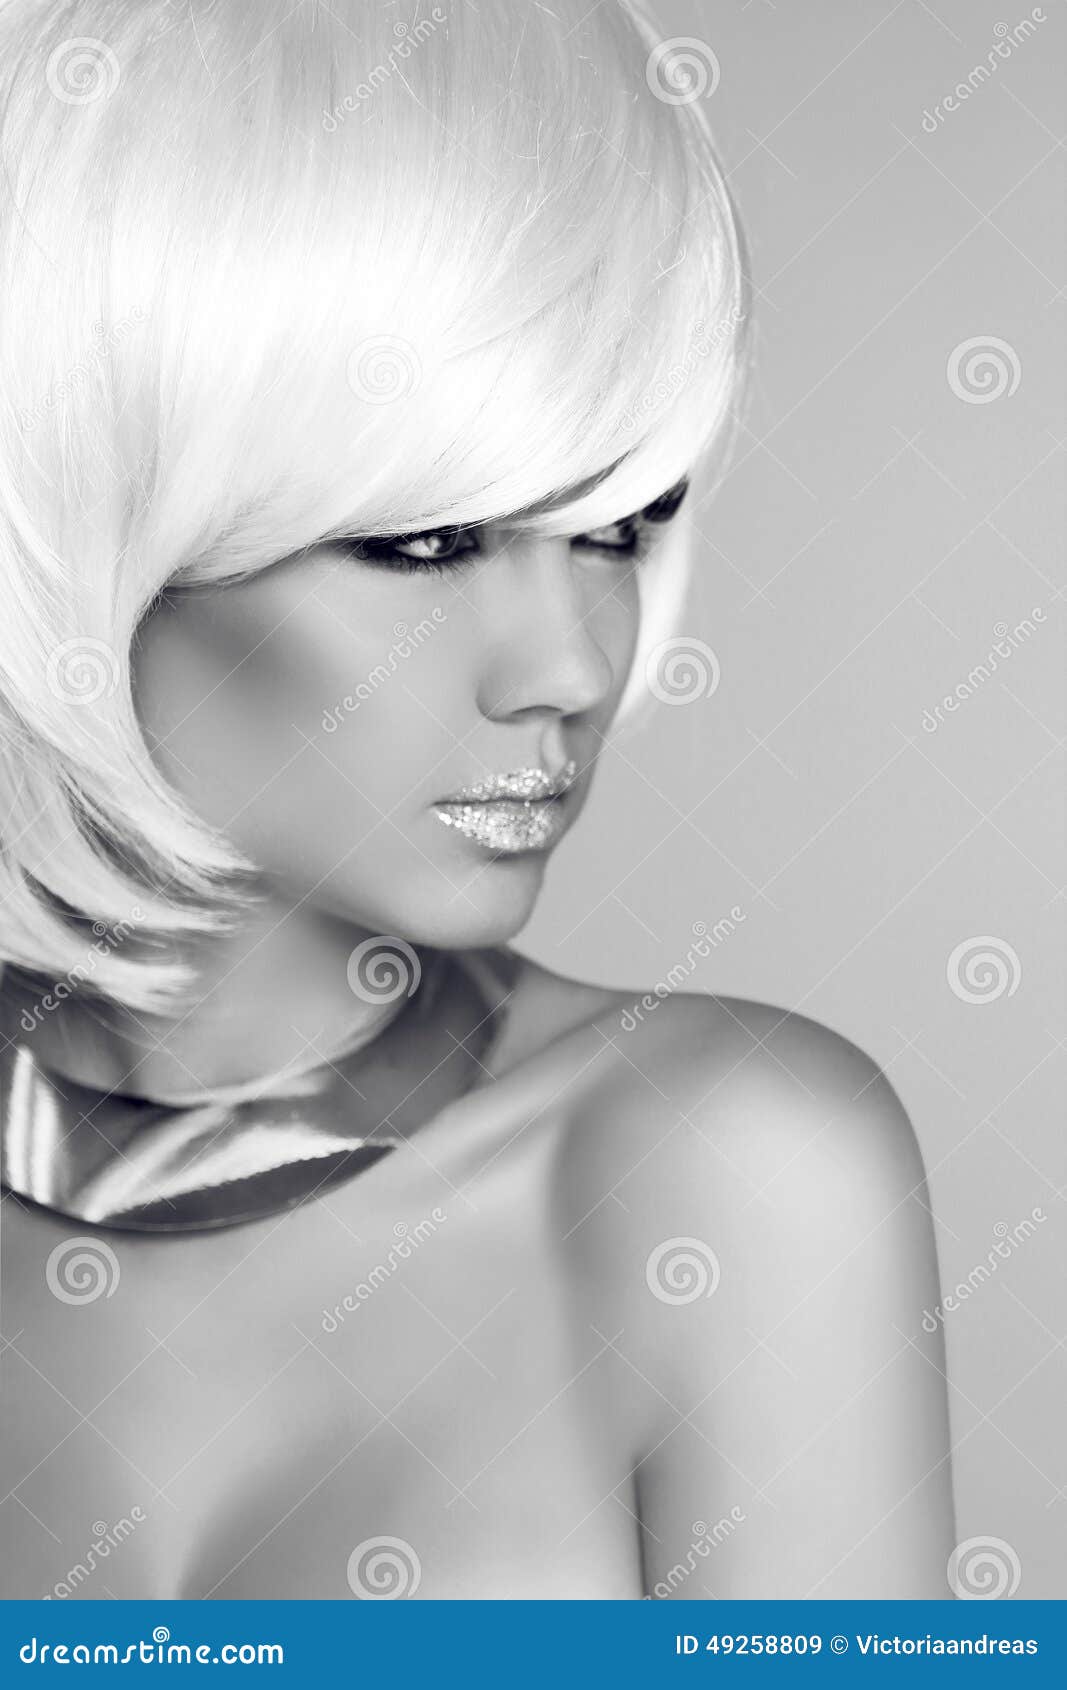 Beauty Blond Girl with White Short Hair Styling. Fashion Portrait of  Attractive Young Woman. Grey Colors. Studio Photo Stock Image - Image of  grey, eyes: 49258809